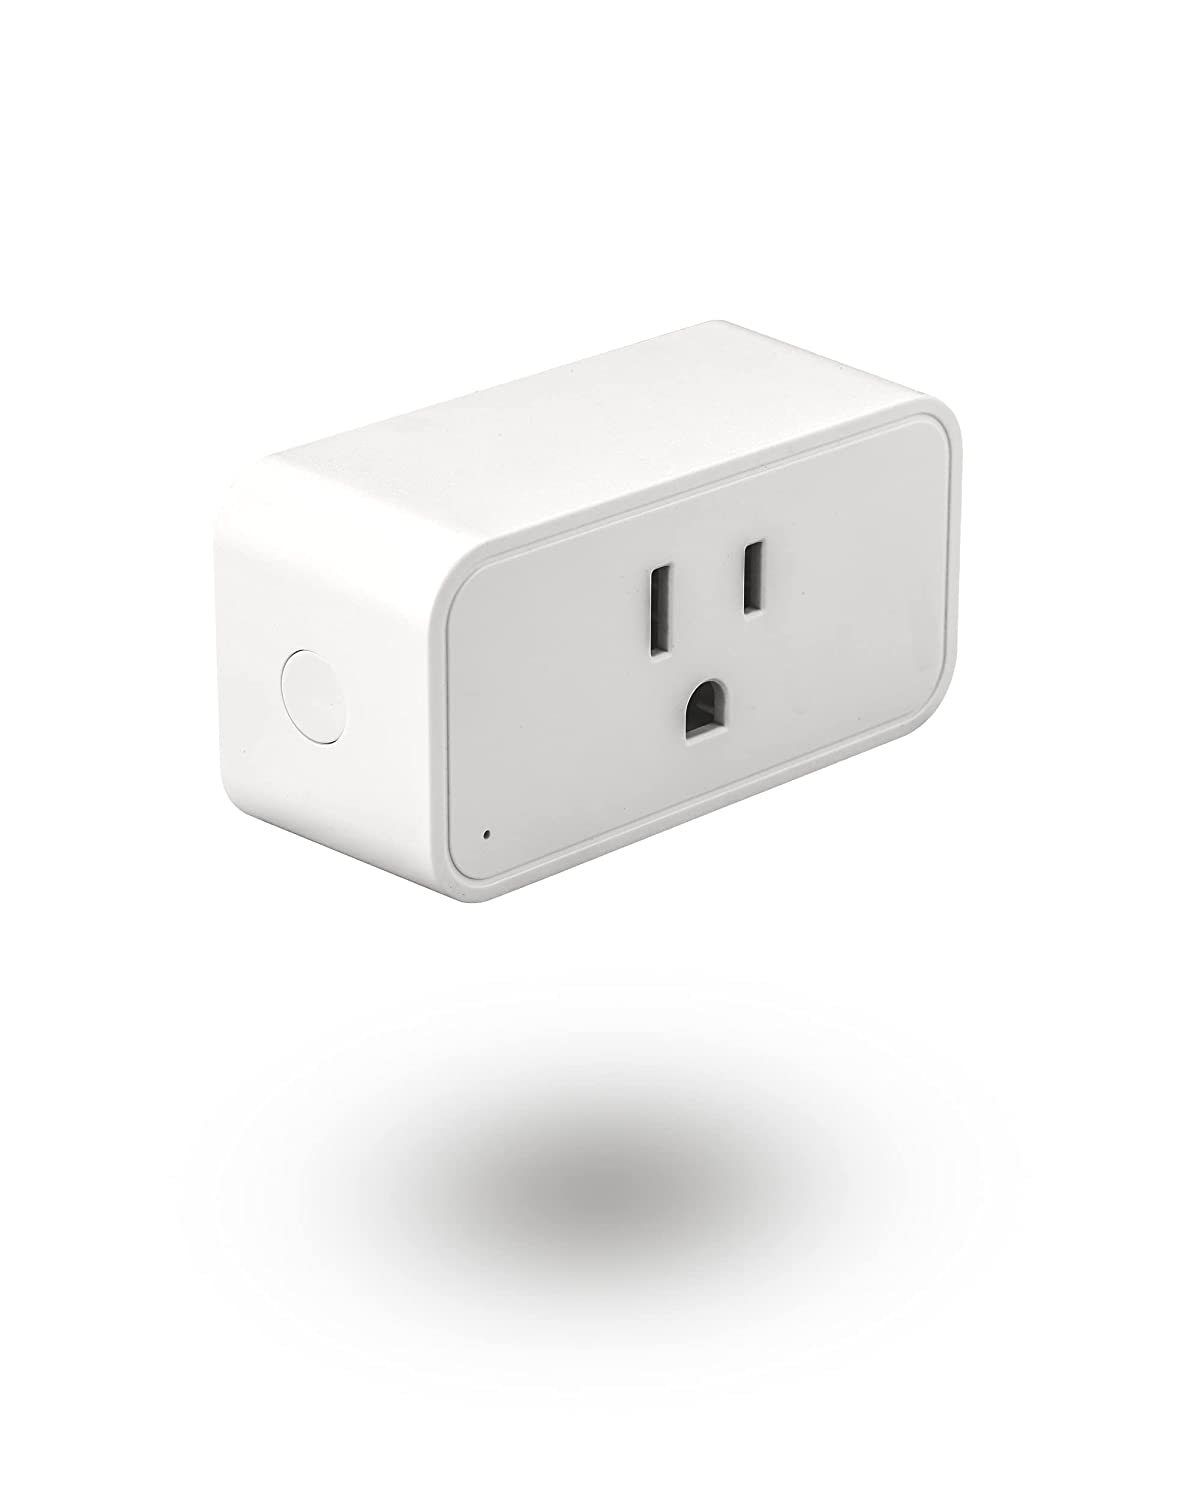 Outdoor Smart Plug, Etekcity Outdoor WiFi Outlet with 2 Sockets 